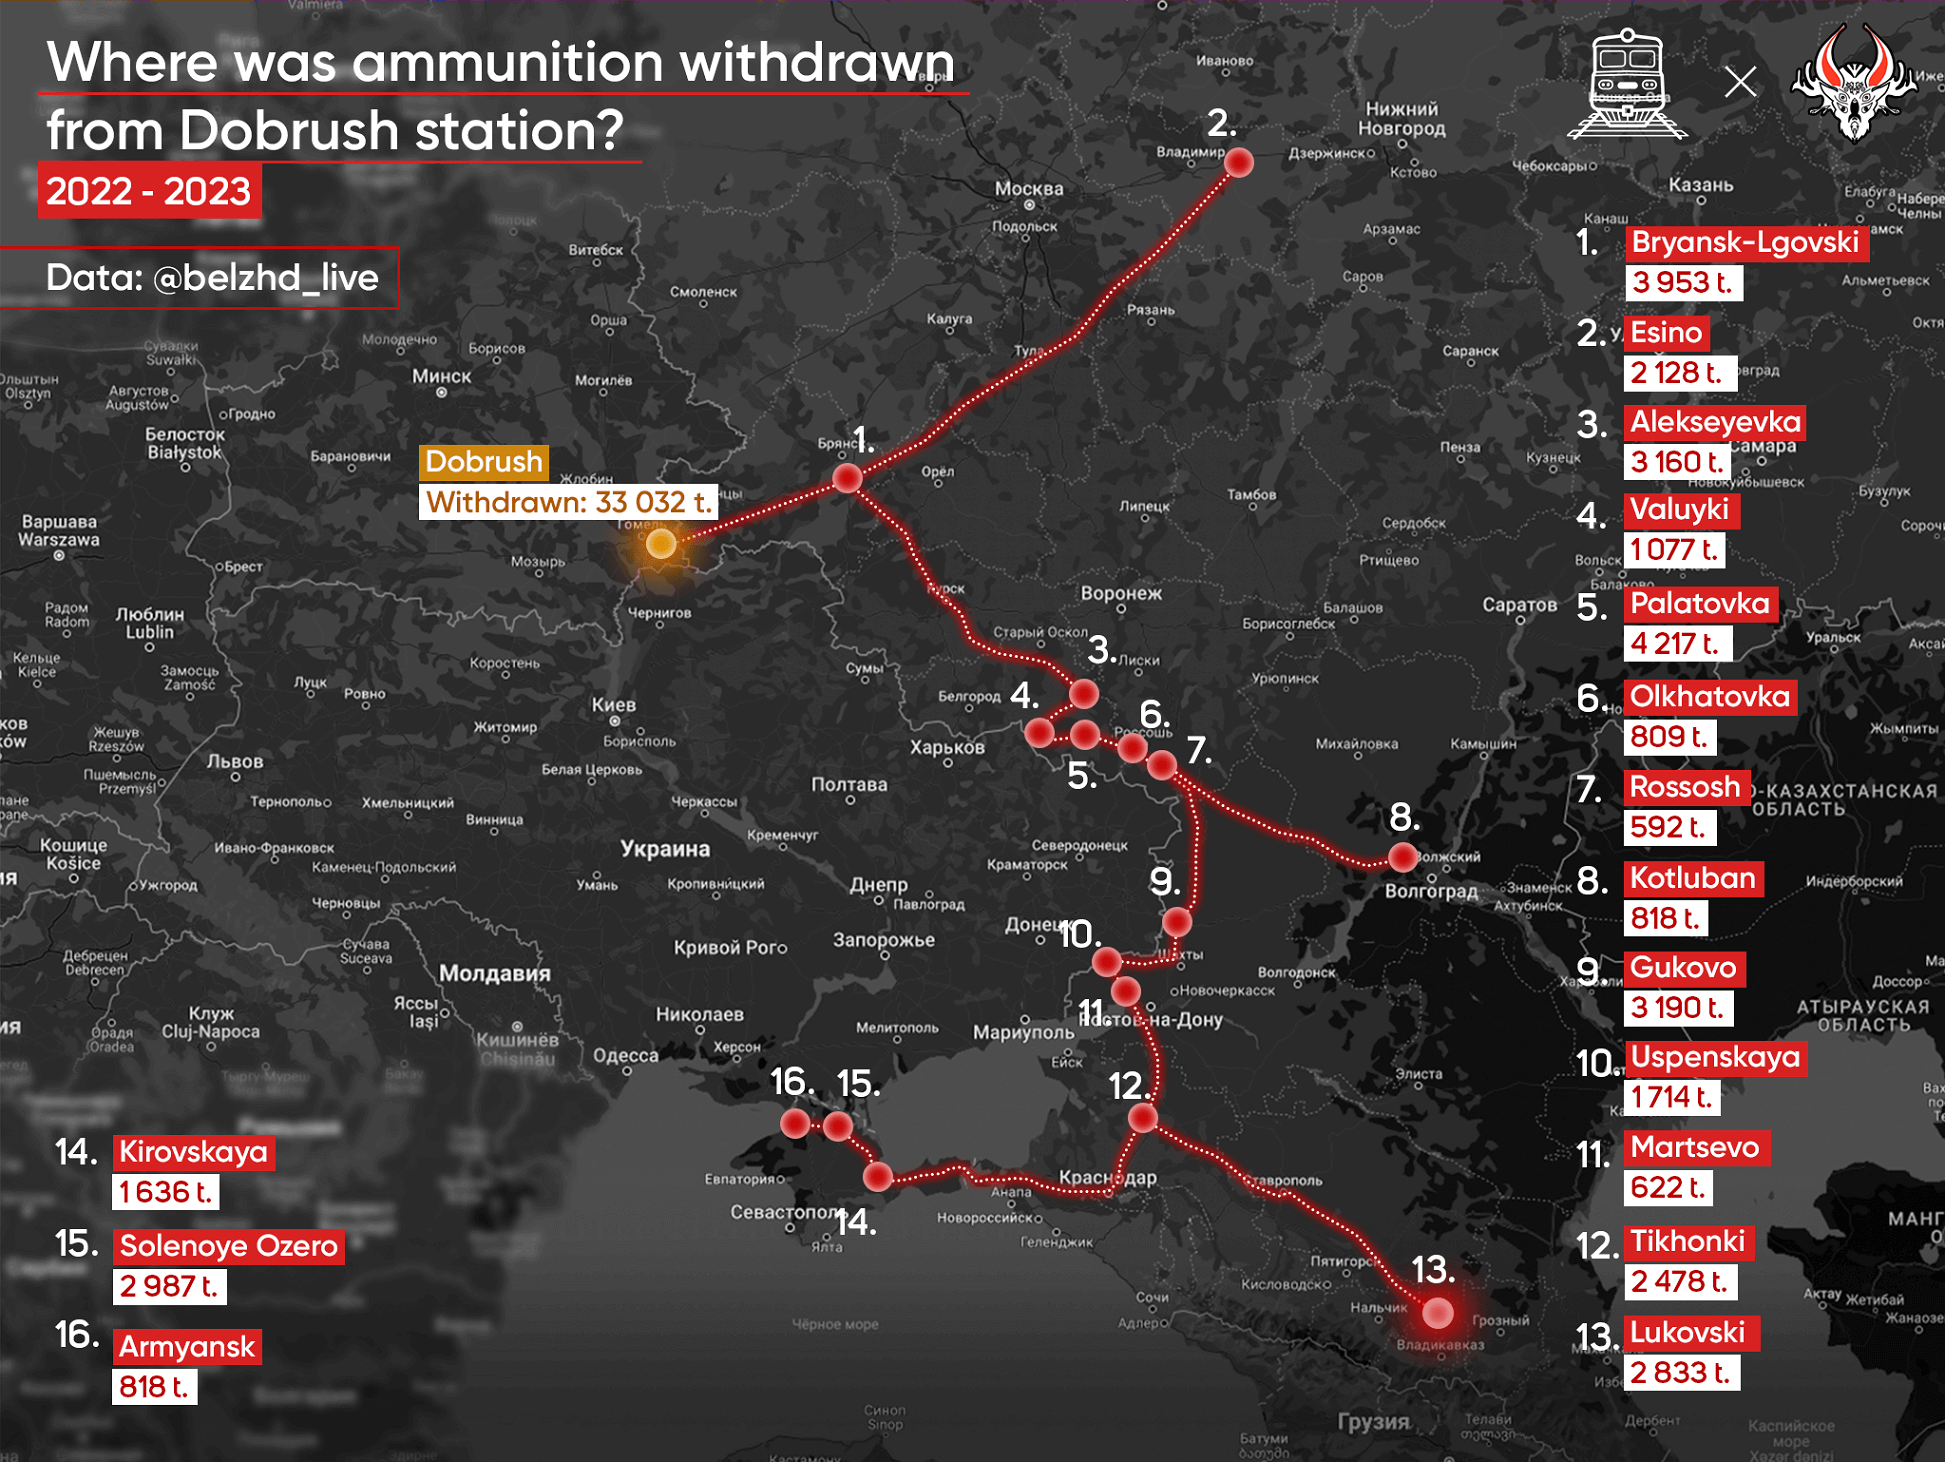 Where was ammunition withdrawn from Dobrush station?